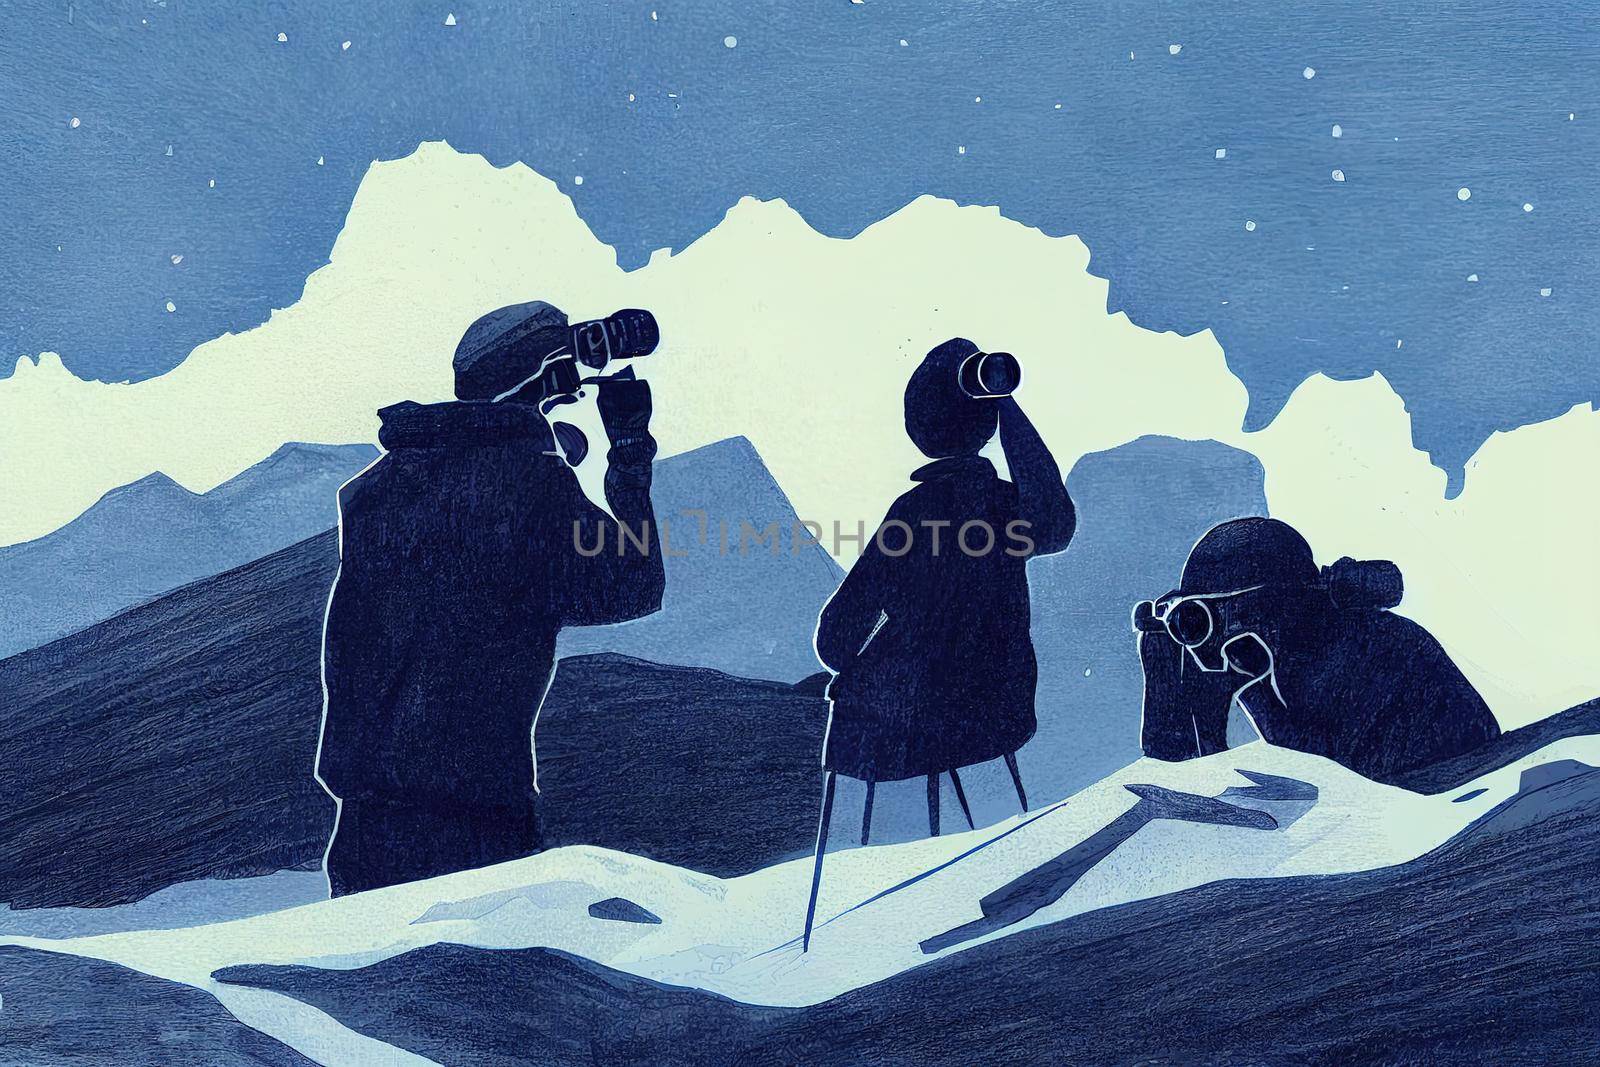 Shooters in mountain gear on the slope are watching the situation through binoculars, Two people are looking through binoculars